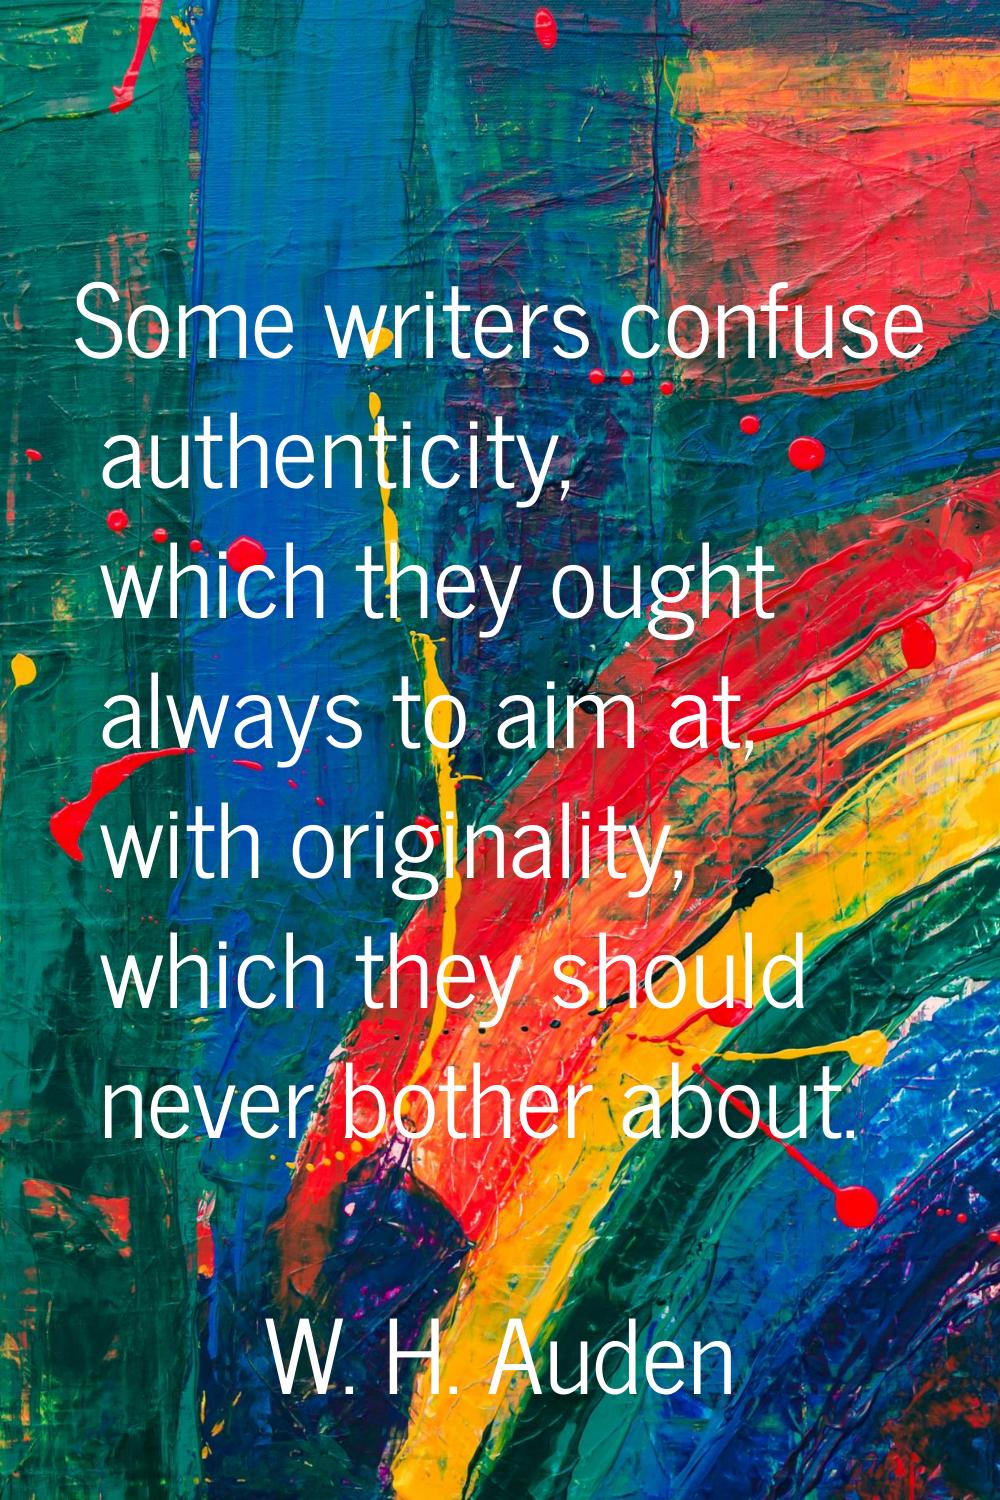 Some writers confuse authenticity, which they ought always to aim at, with originality, which they 